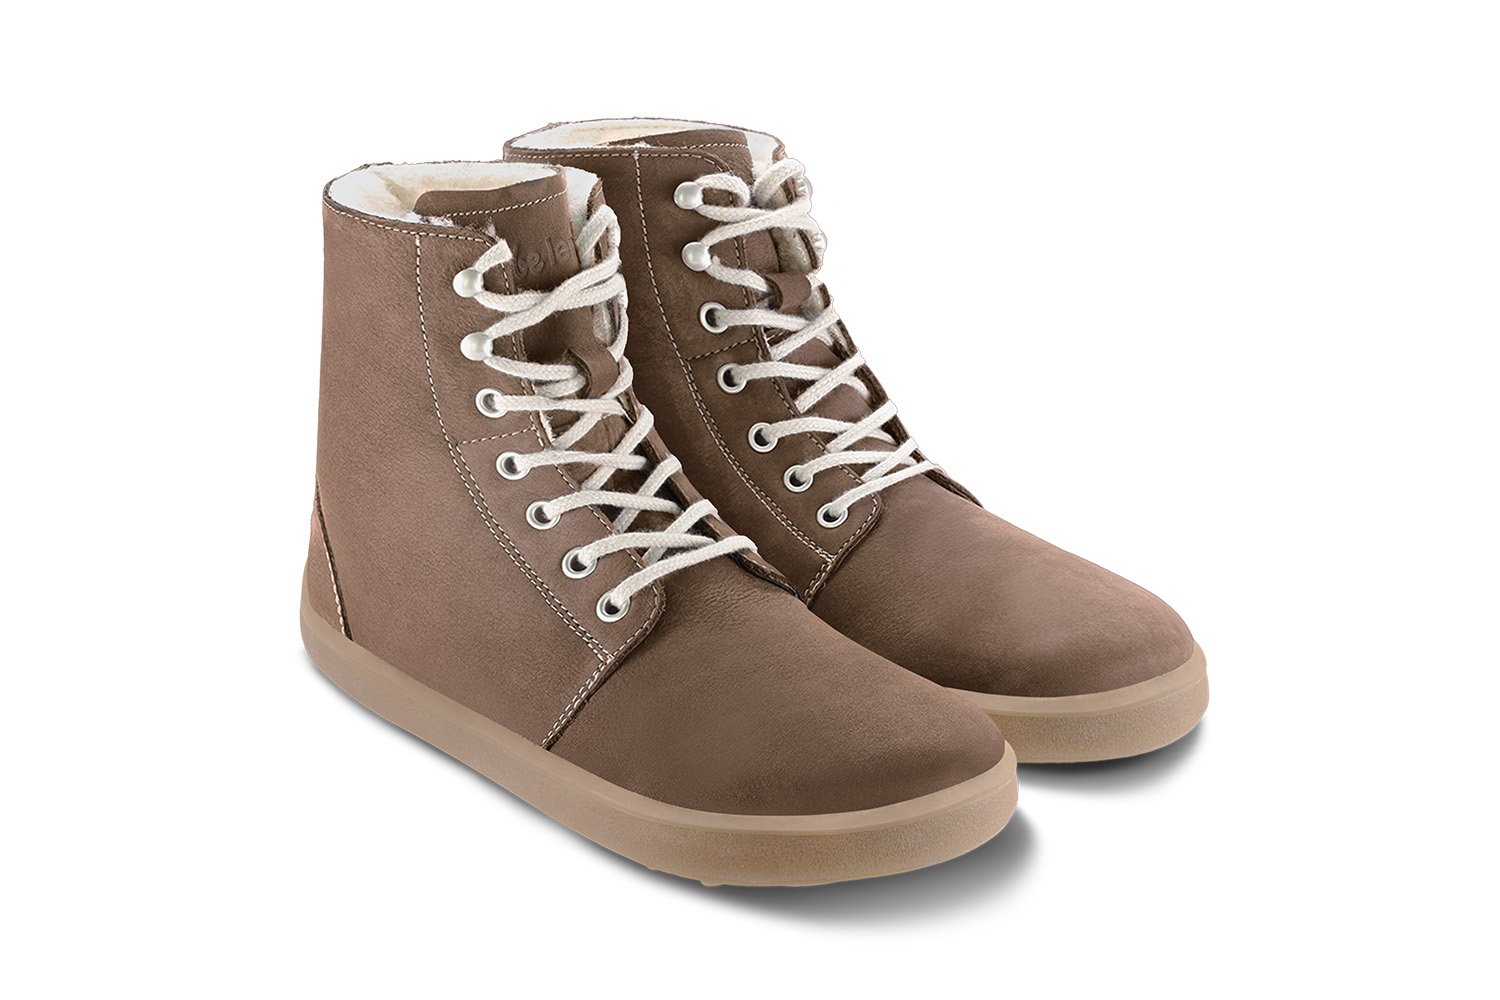 Be Lenka Barefoot Snowfox Discount Price - Brown Womens Ankle Boots